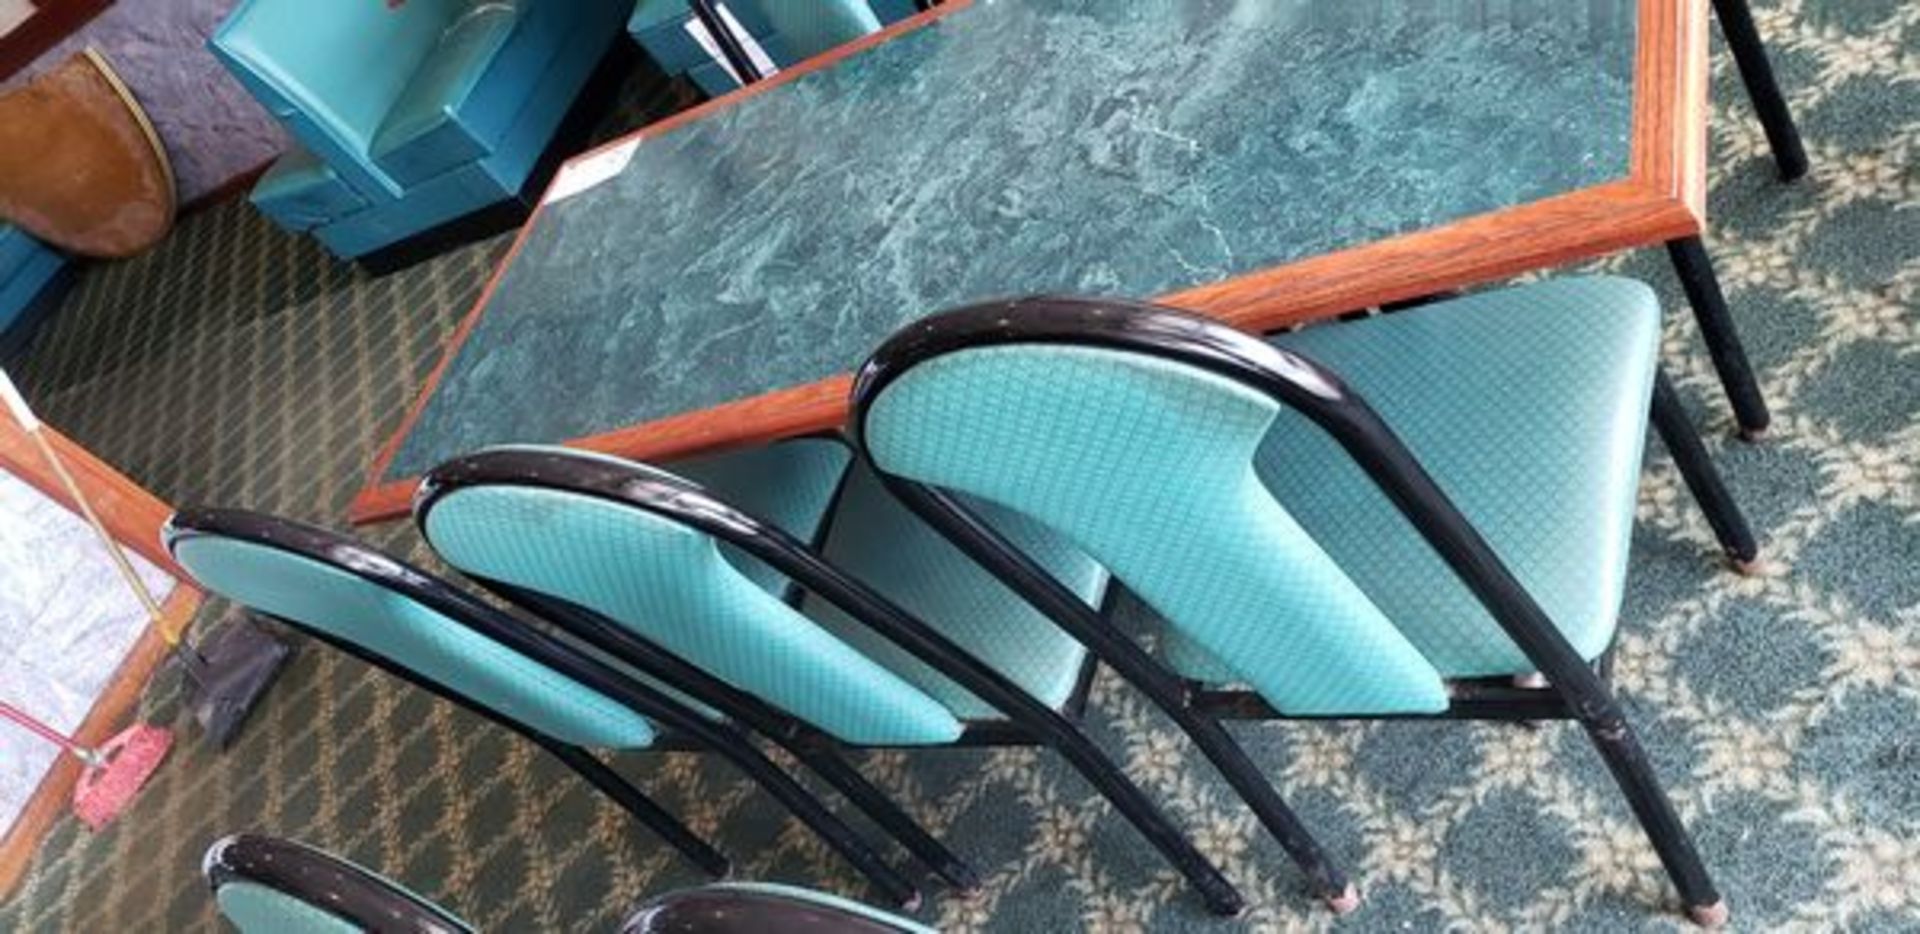 UPHOLSTERED METAL FRAME GREEN AND BLACK DINING CHAIRS - Image 2 of 7